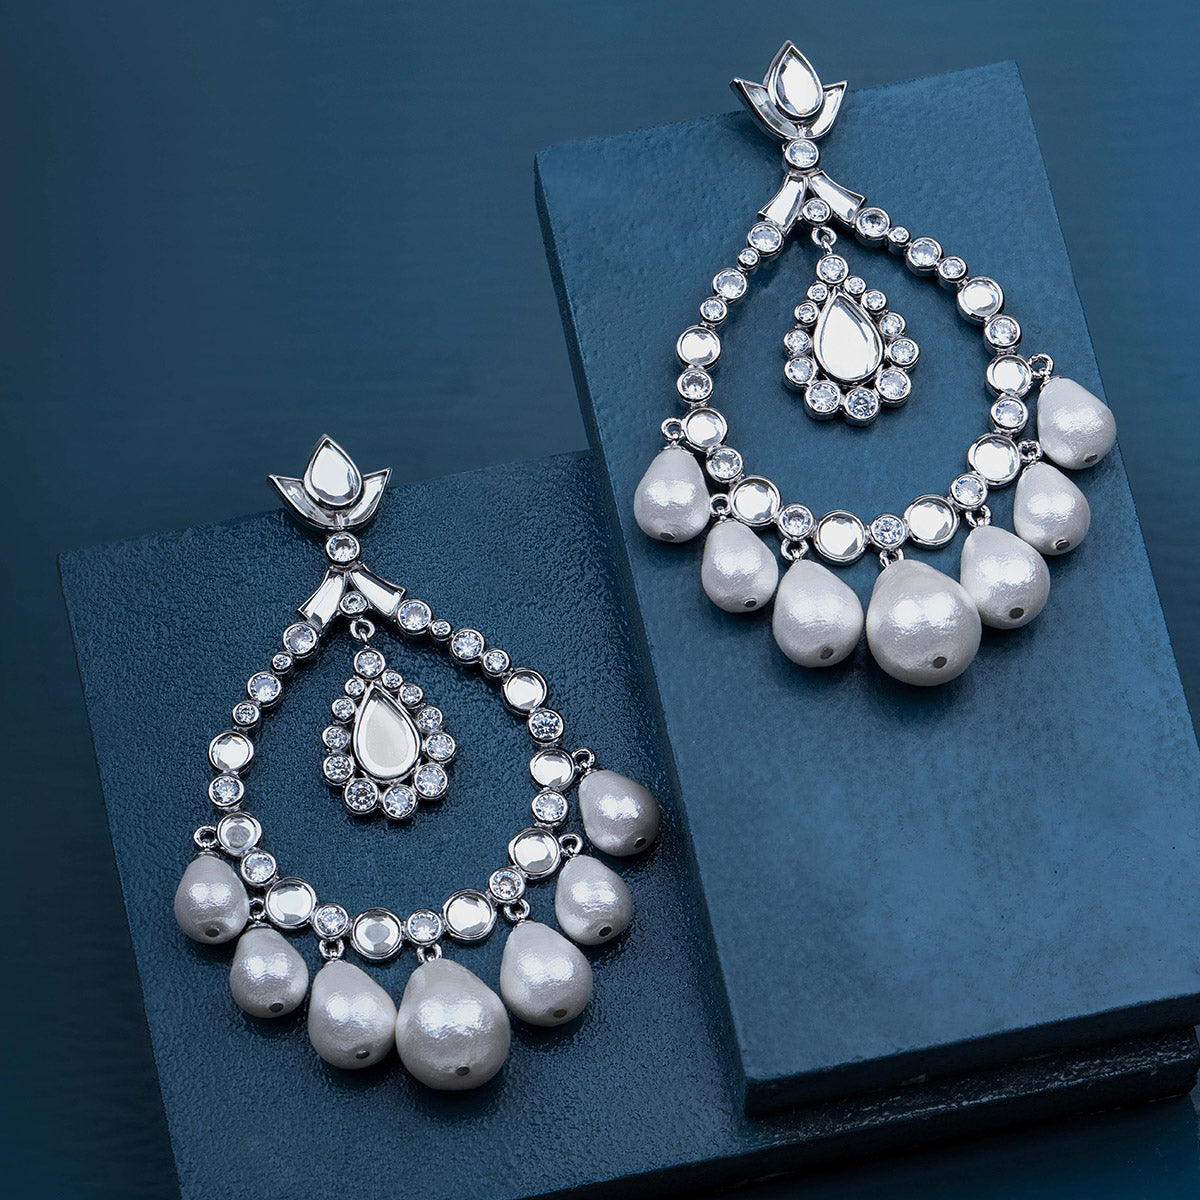 Danglers and Drop Earrings | Designer Earrings Online at Aza Fashions